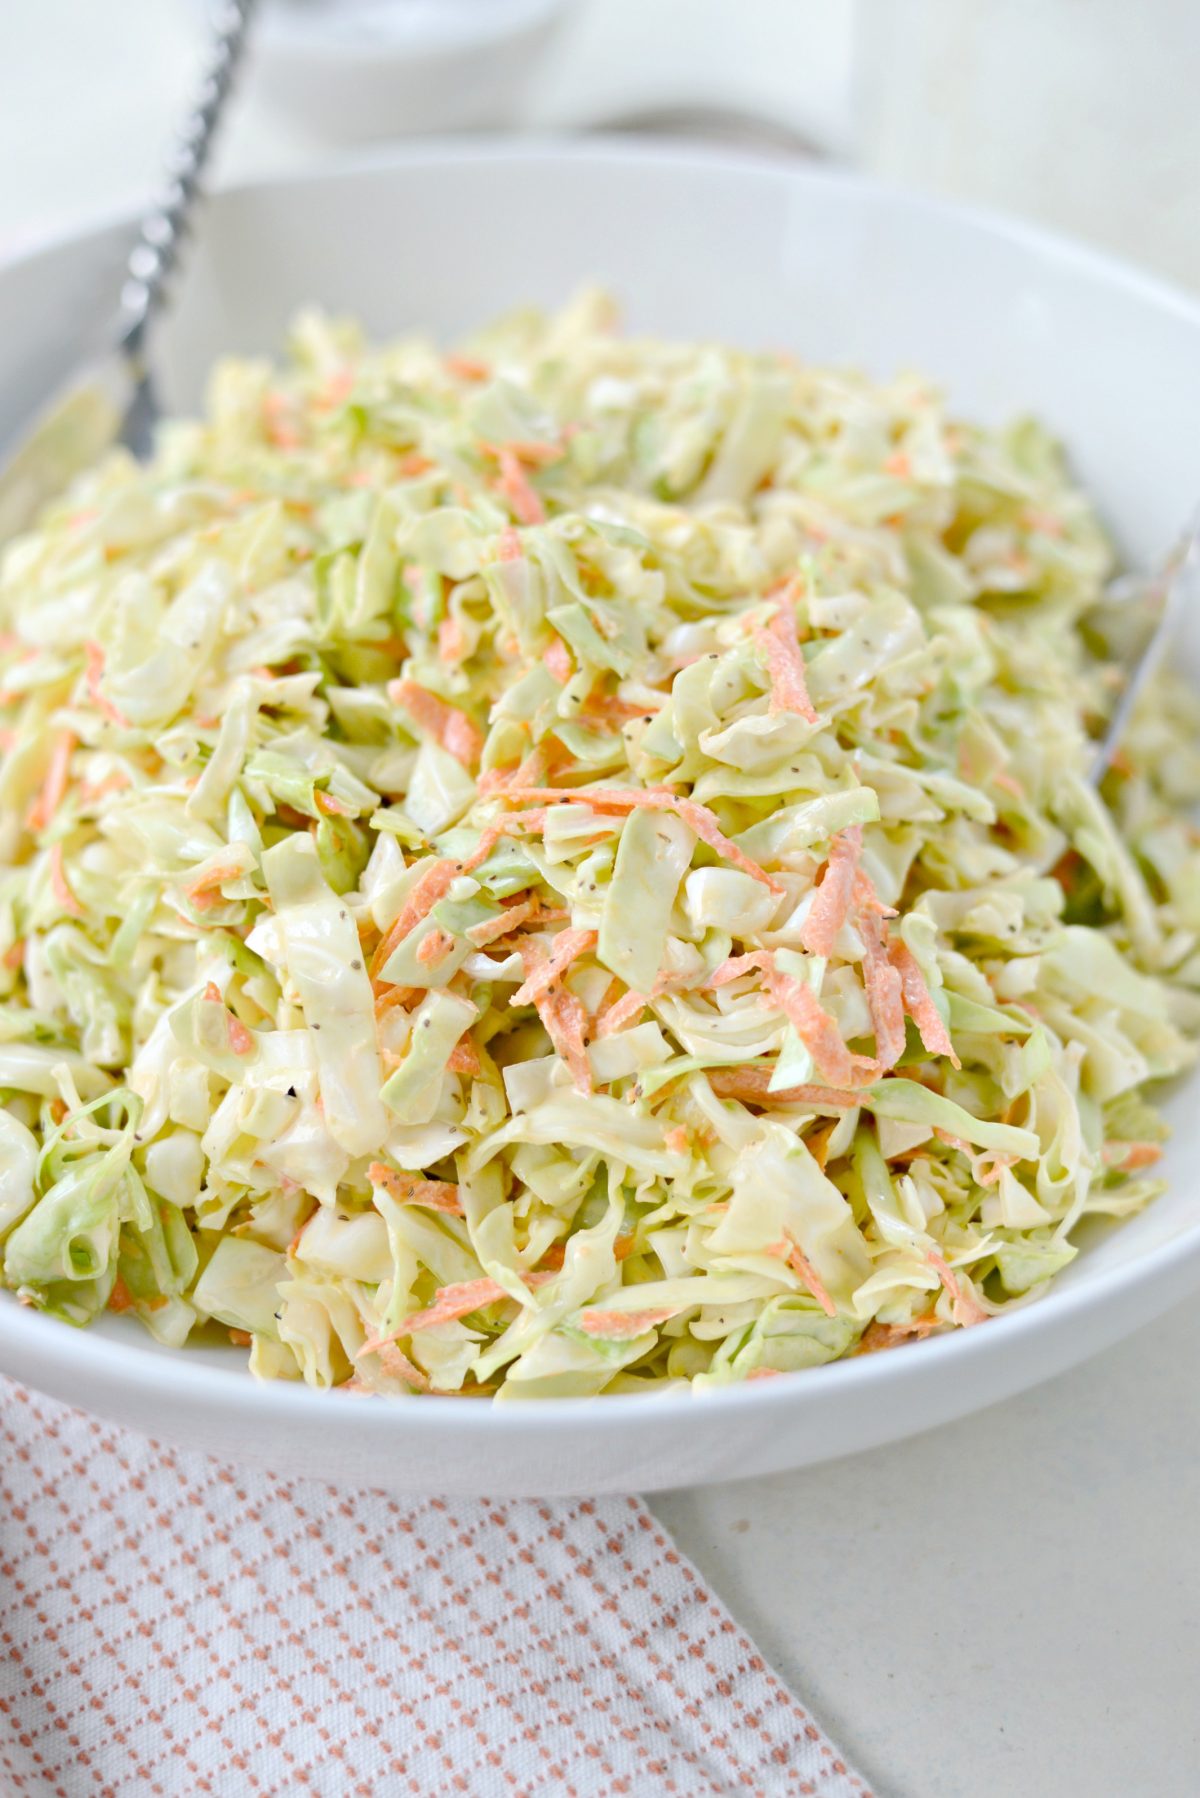 Classic Coleslaw Recipe with Homemade Dressing - Simply Scratch